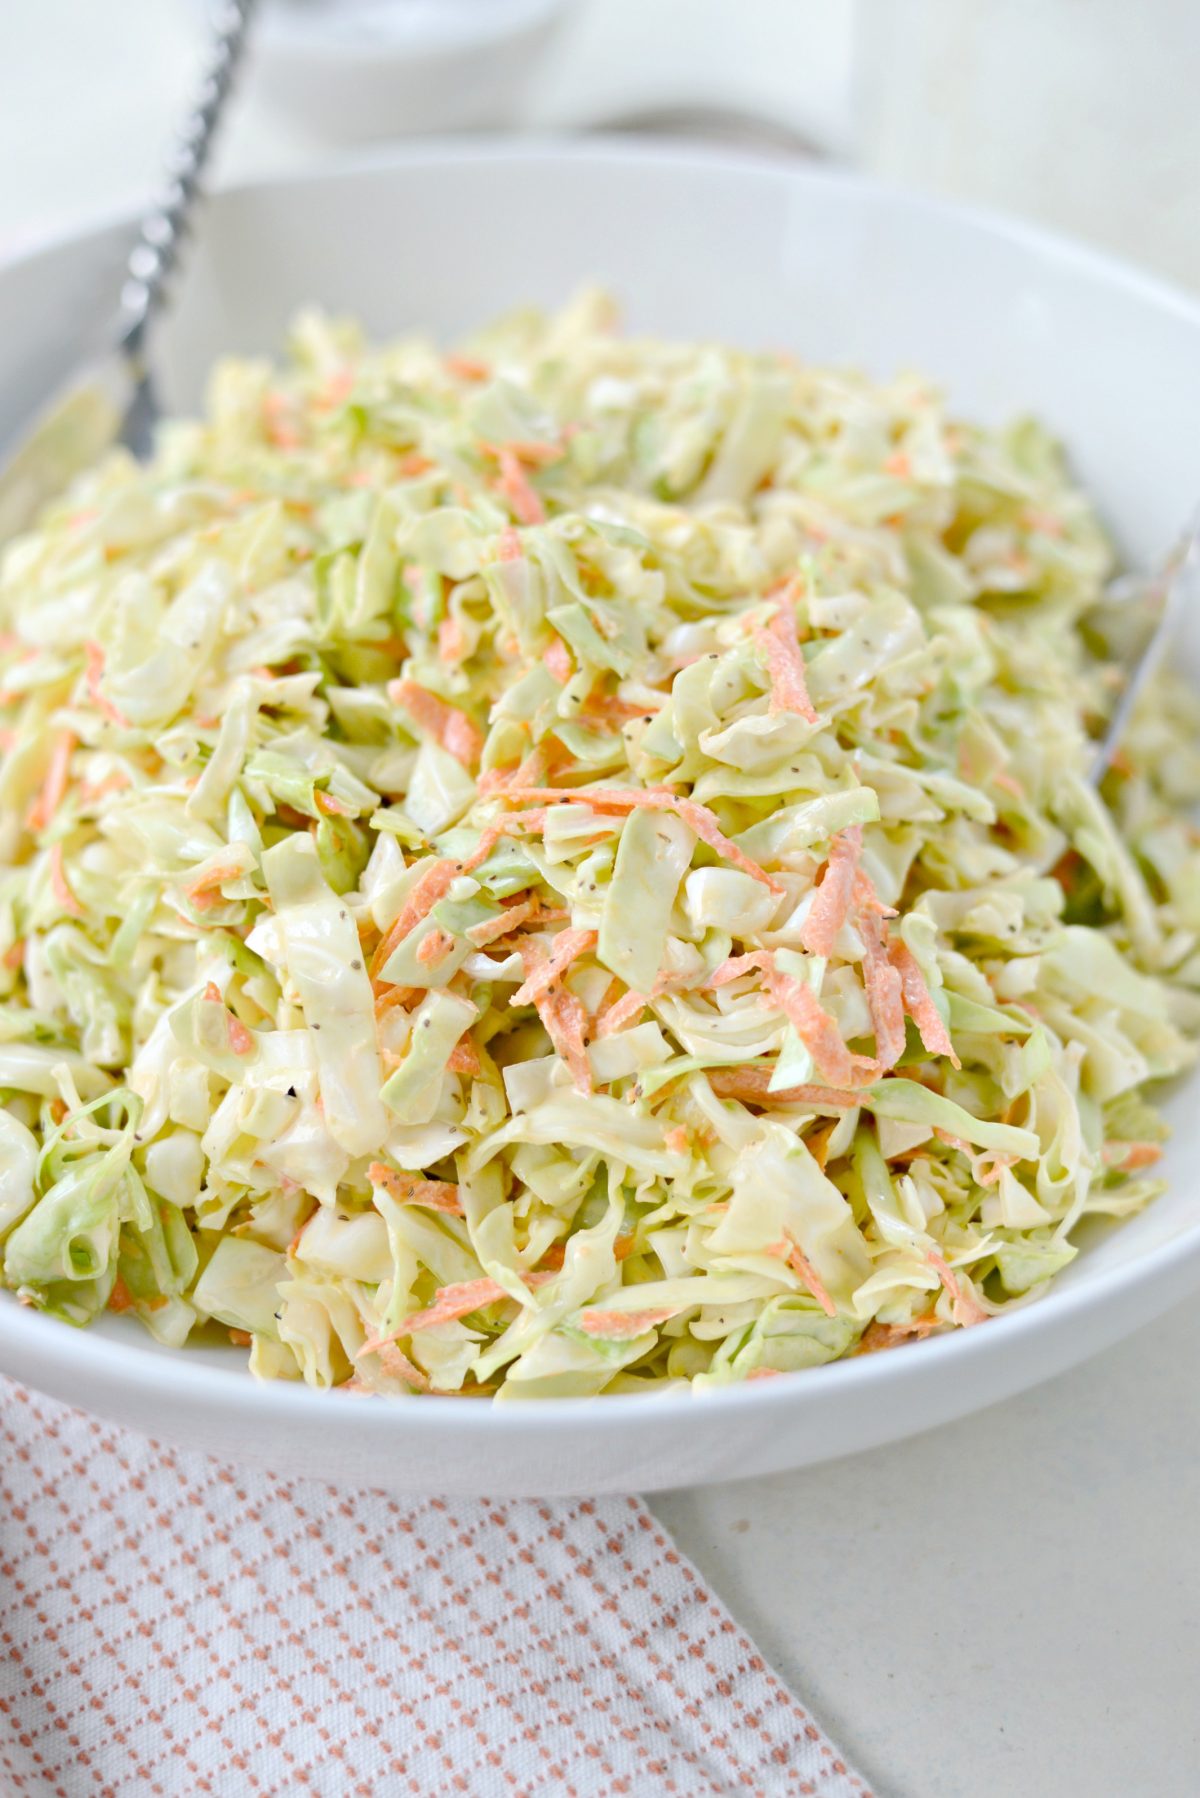 Classic Coleslaw Recipe with Homemade Dressing - Simply Scratch